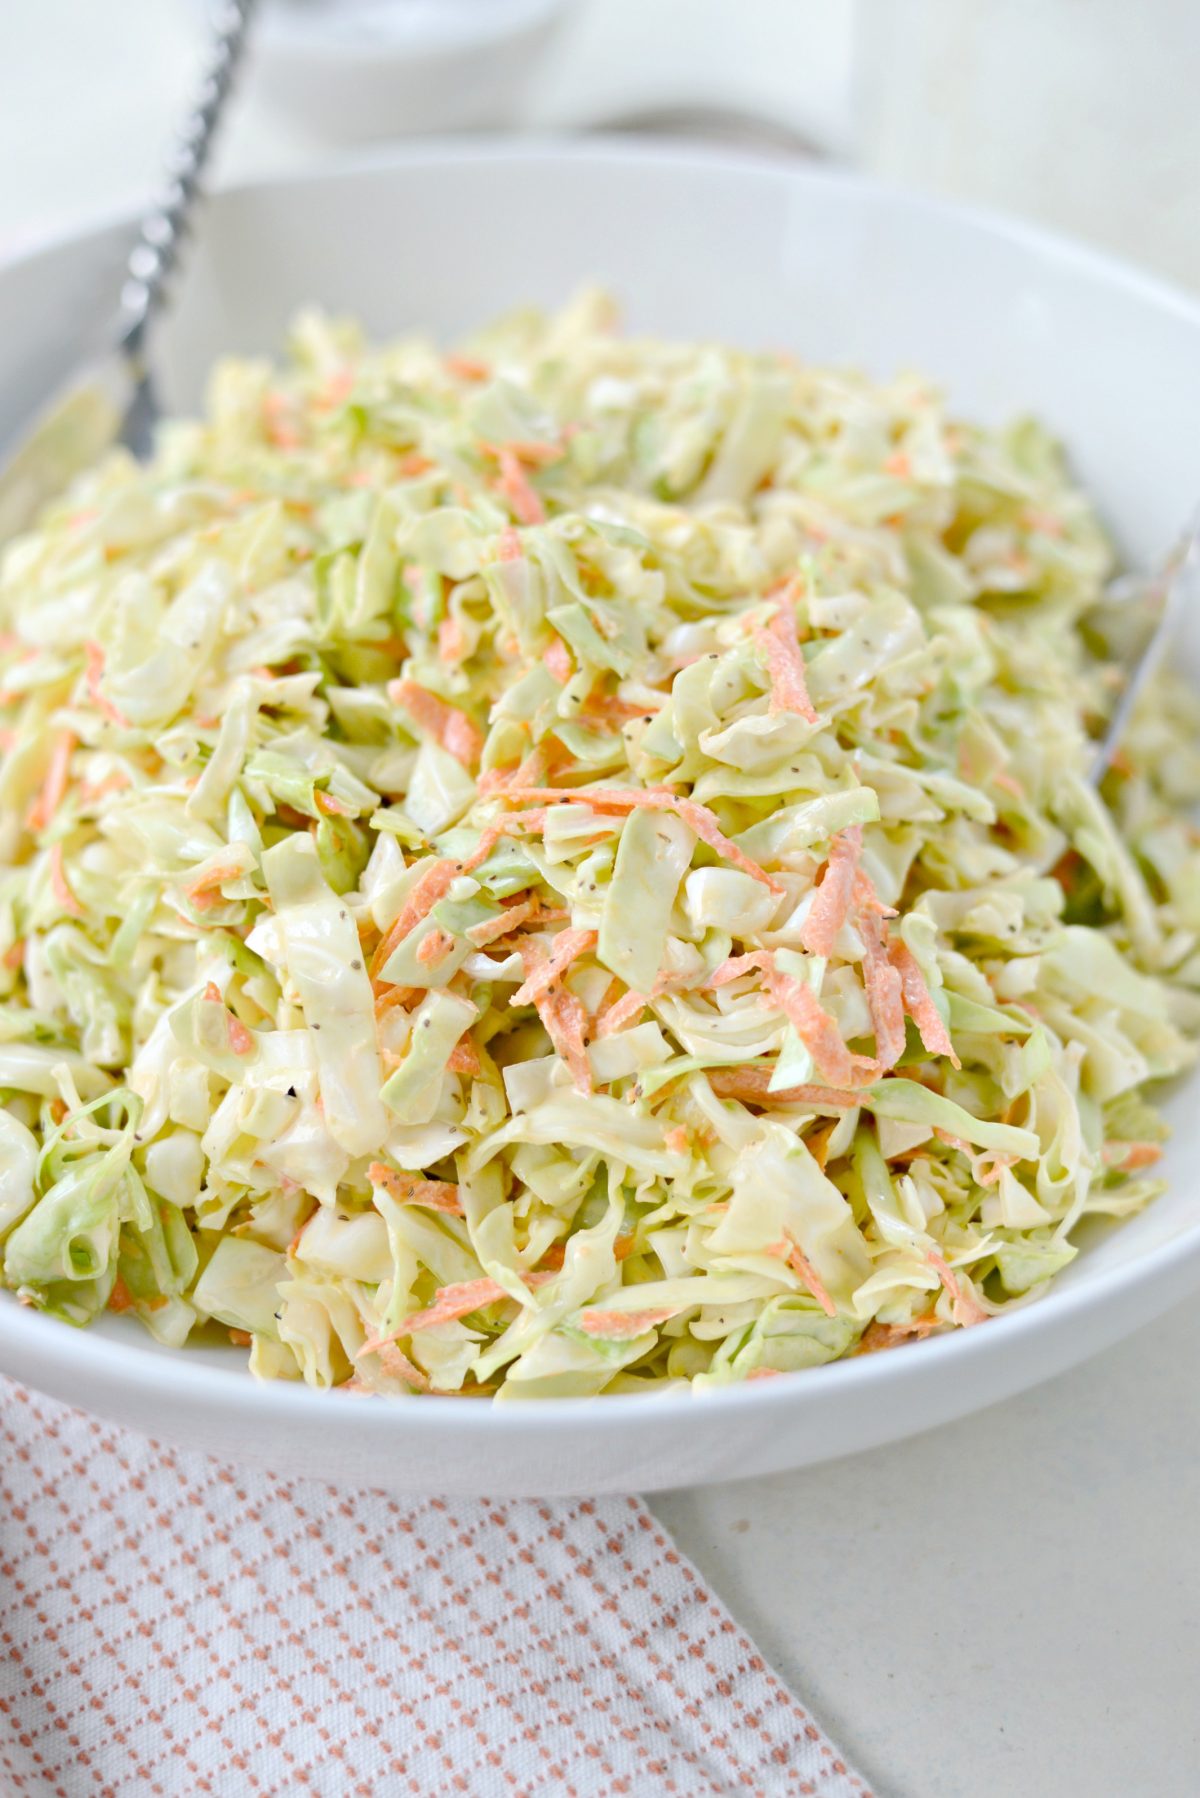 Classic Coleslaw Recipe with Homemade Dressing - Simply Scratch